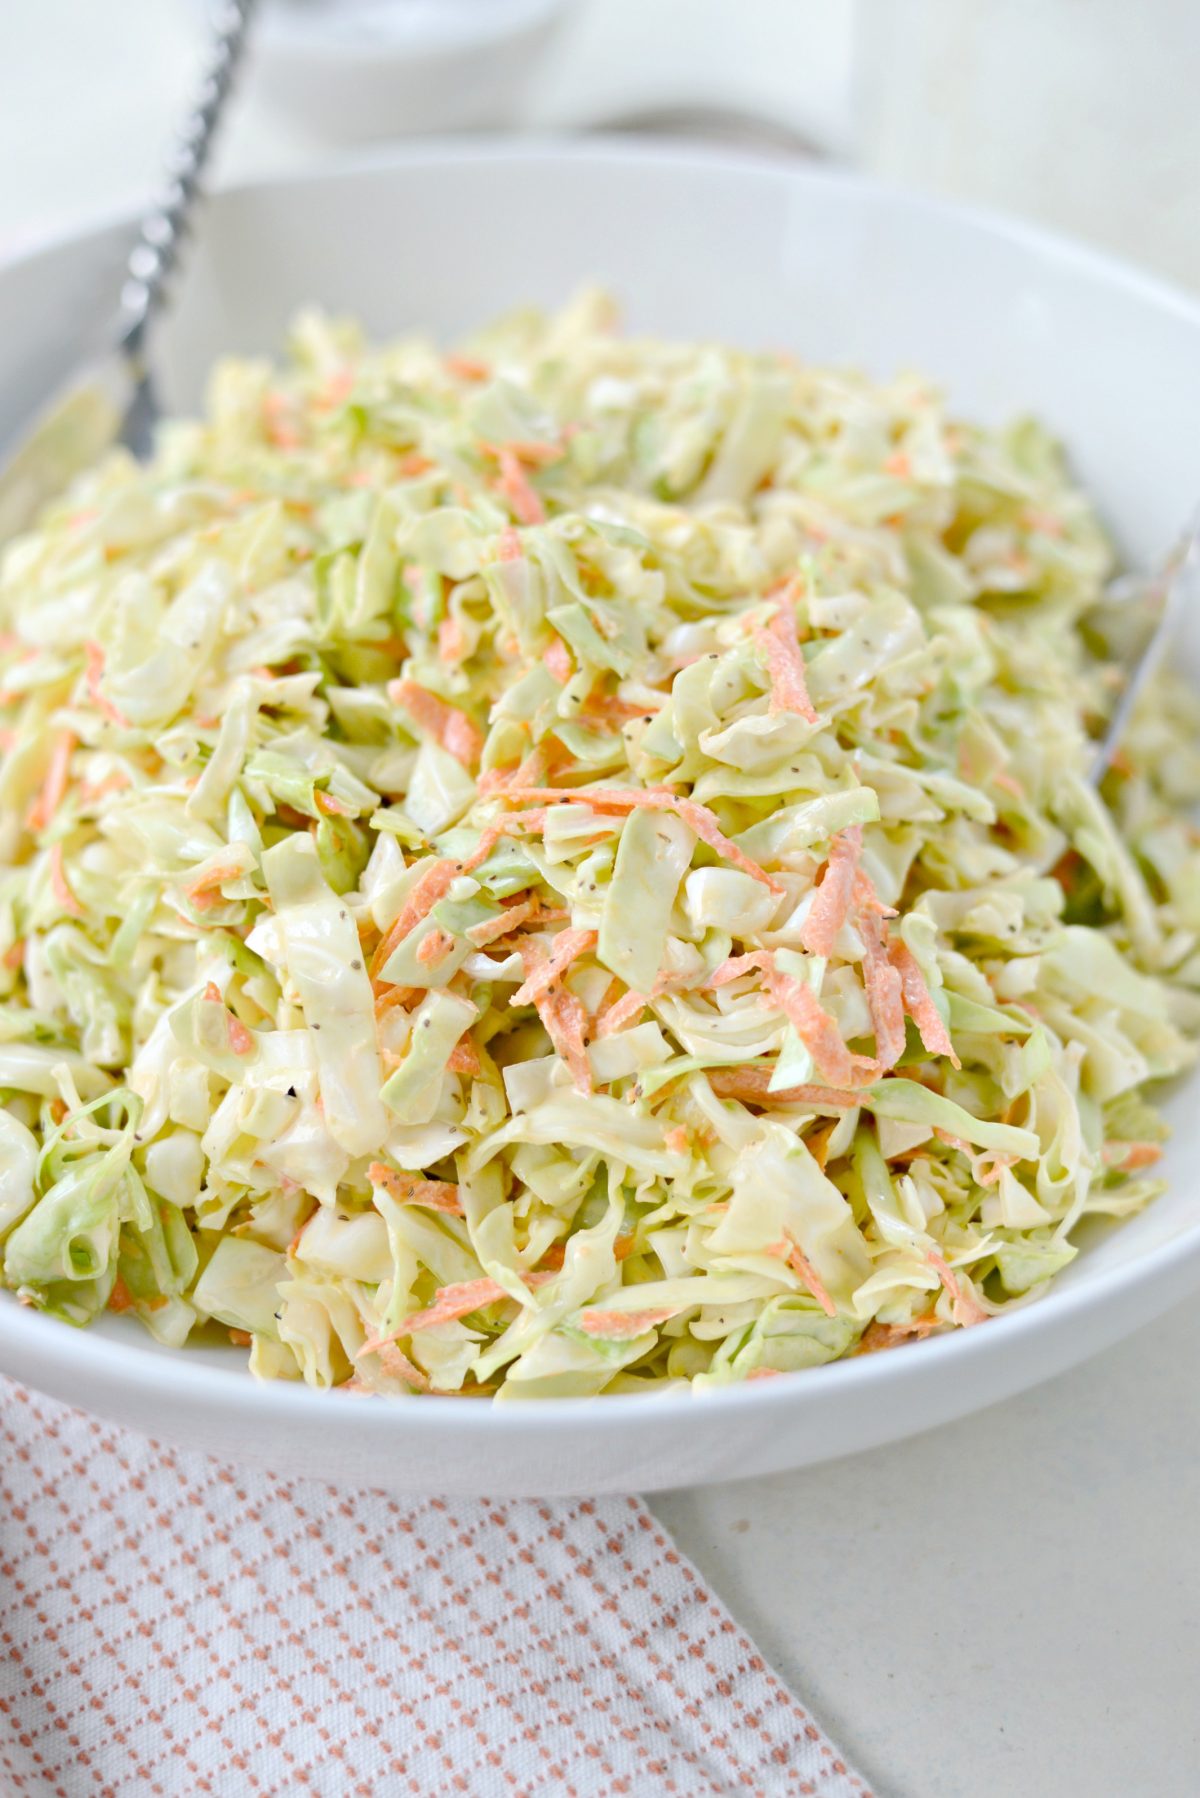 Classic Coleslaw Recipe with Homemade Dressing - Simply Scratch